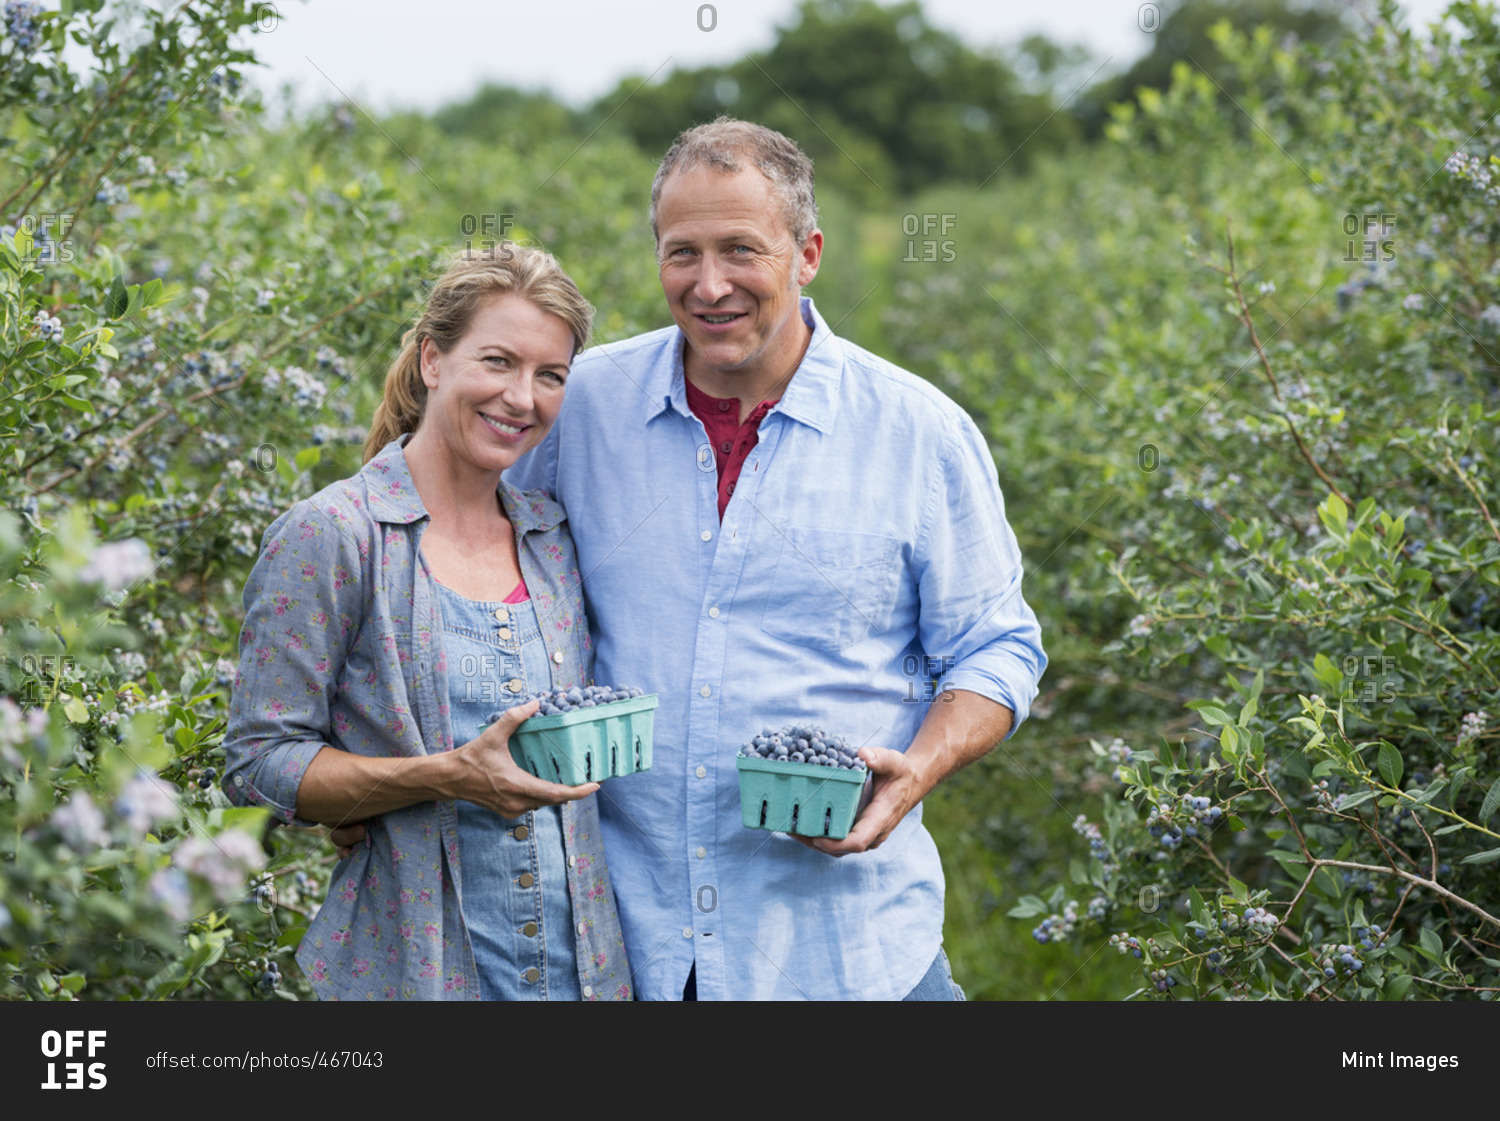 An organic fruit farm A mature couple picking the berry fruits from the bushes